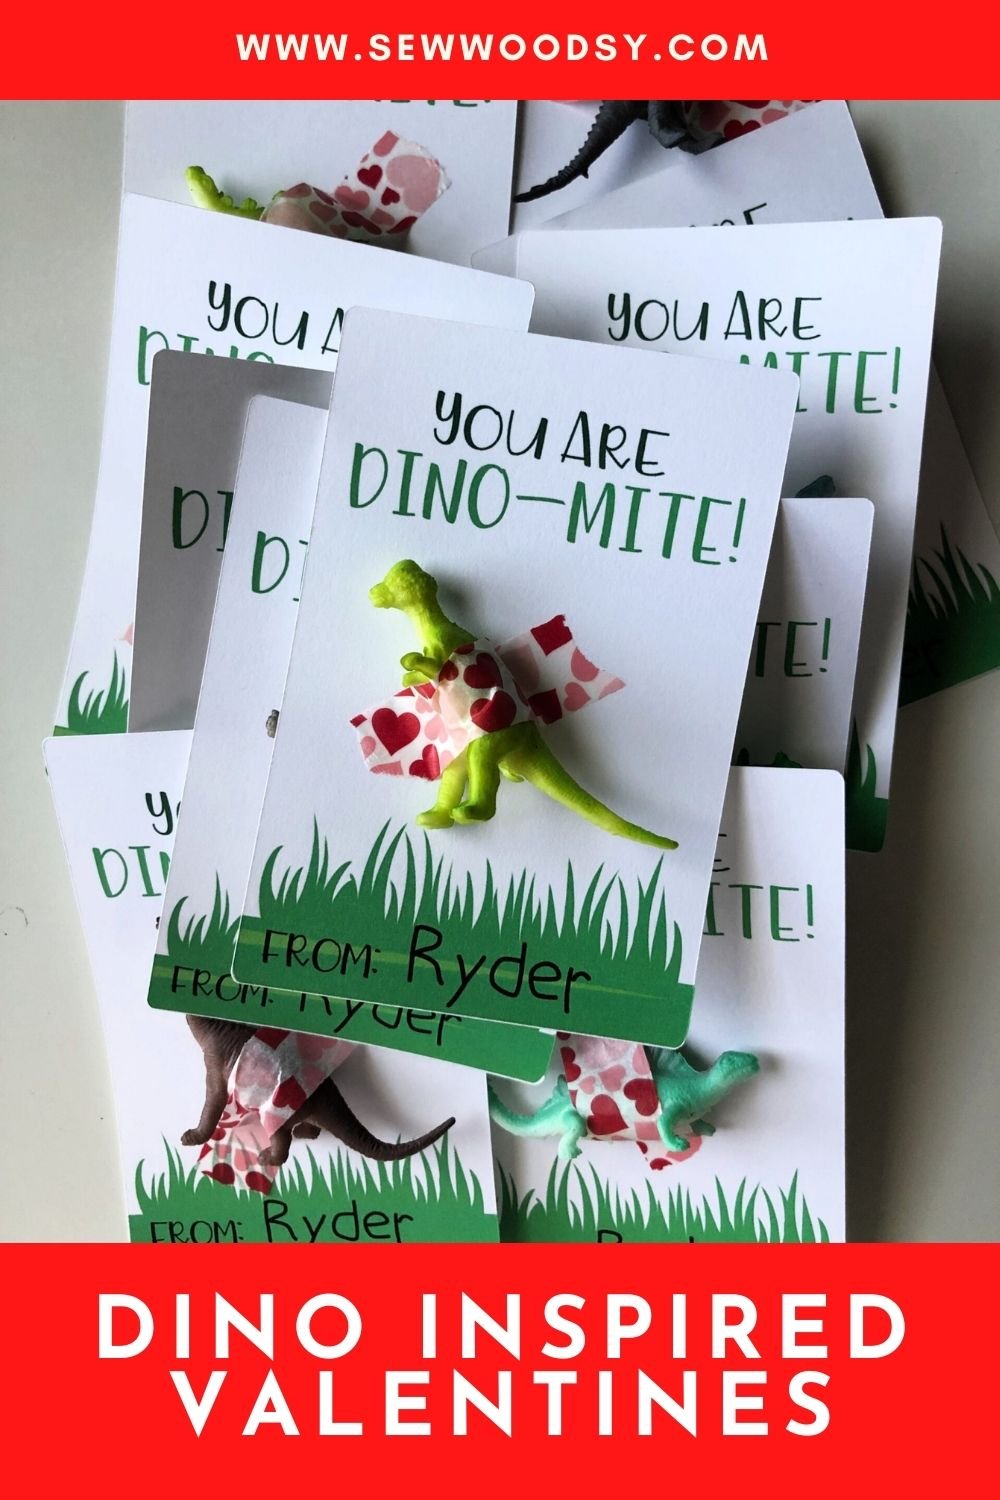 Top view of a pile of dinosaur valentines with post title text on image for Pinterest.